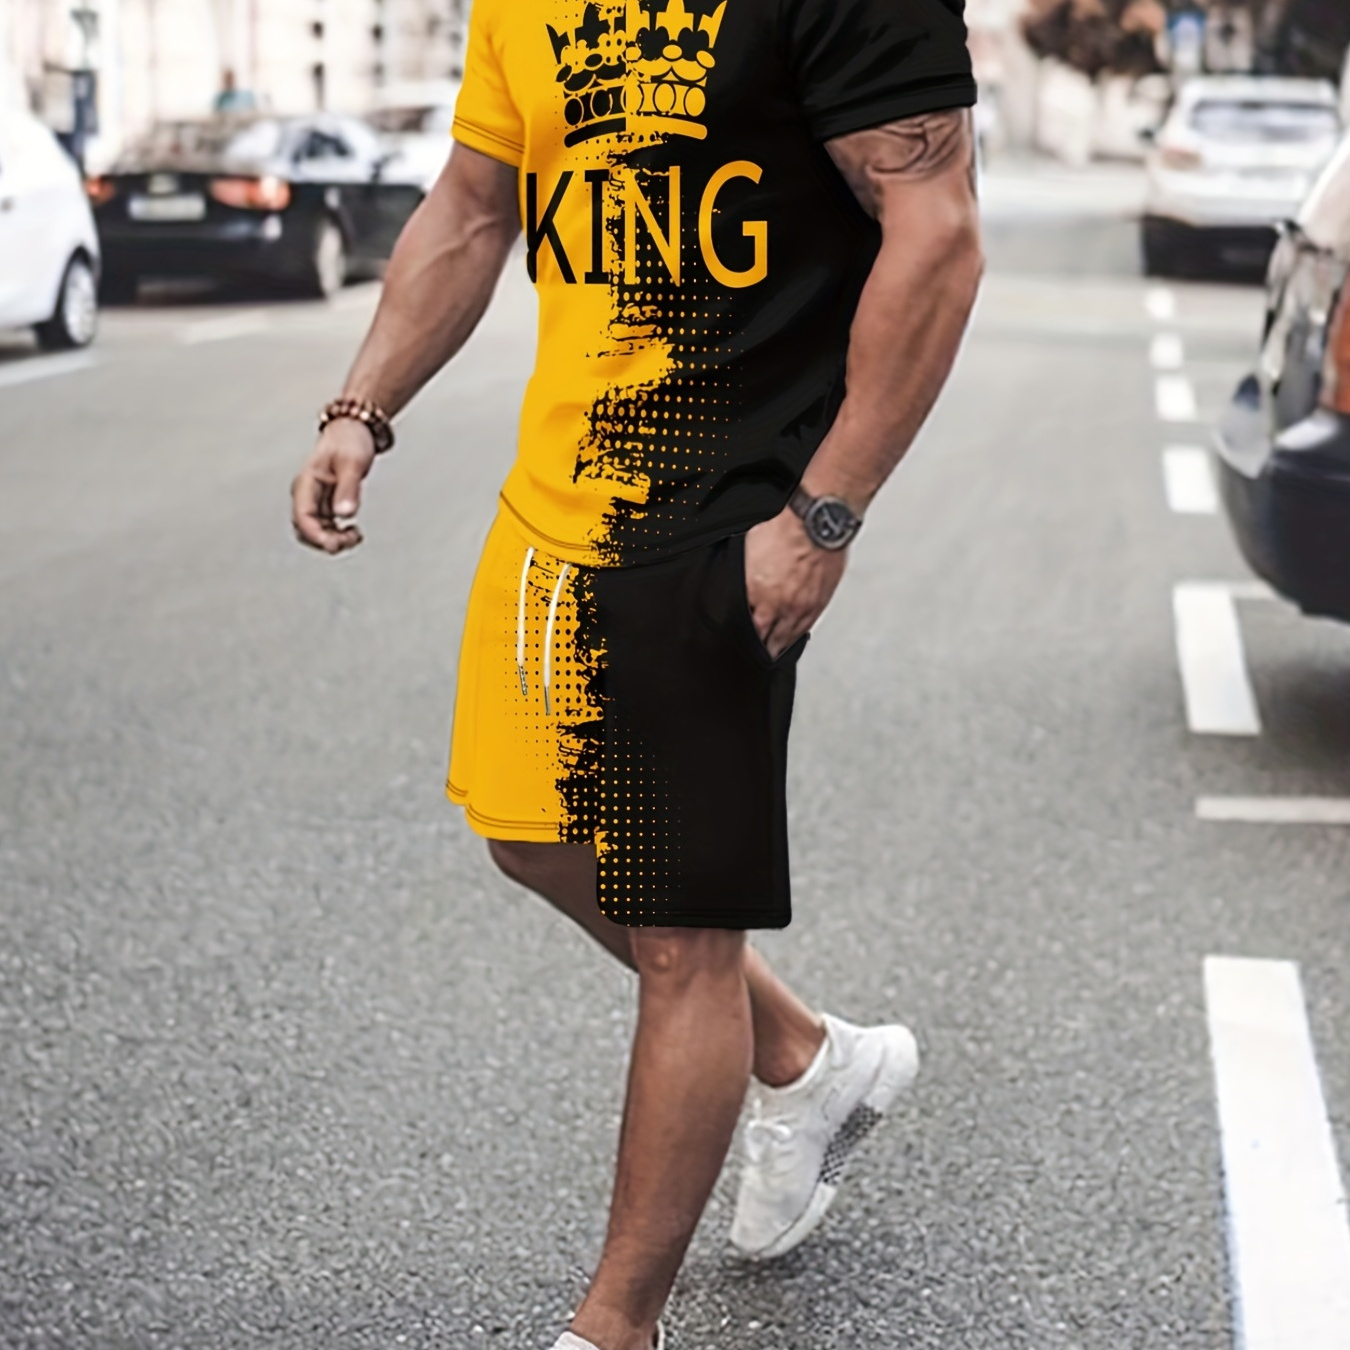 

King Print 2pcs Trendy Outfits For Men, Casual Crew Neck Short Sleeve T-shirt And Drawstring Shorts Set For Summer, Men's Clothing Loungewear Vacation Workout